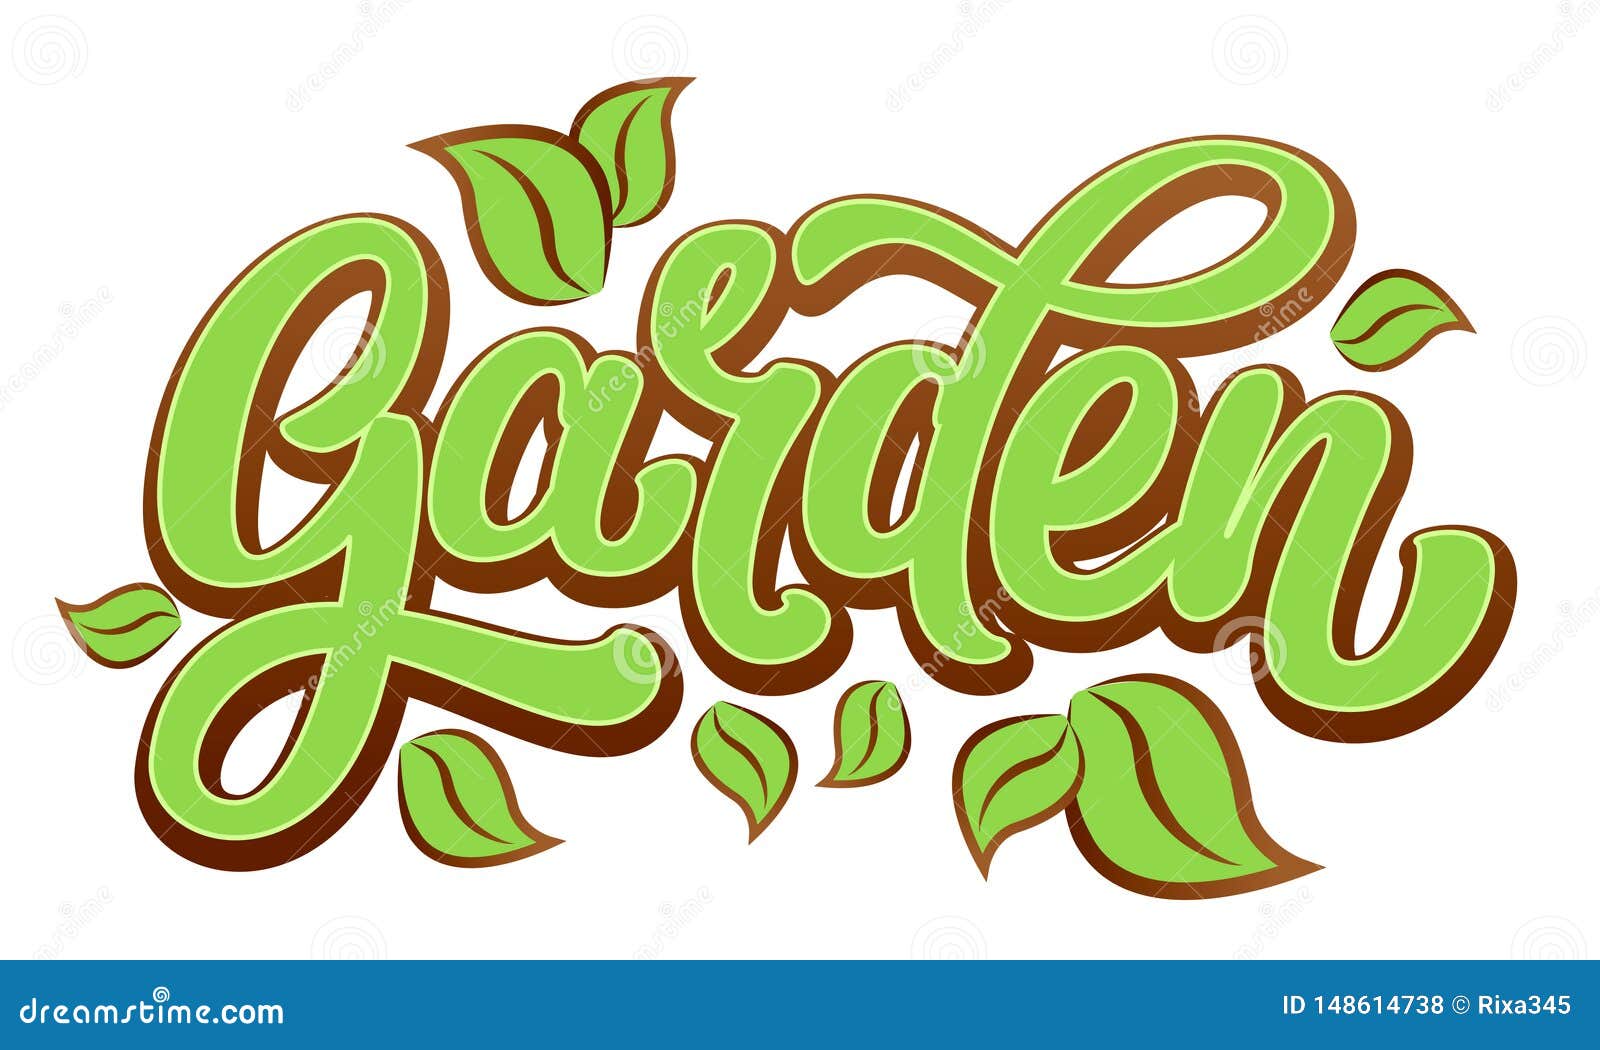 nature letters calligraphy word plant logo decoration print text simple wood symbol design collection lettering garden 148614738